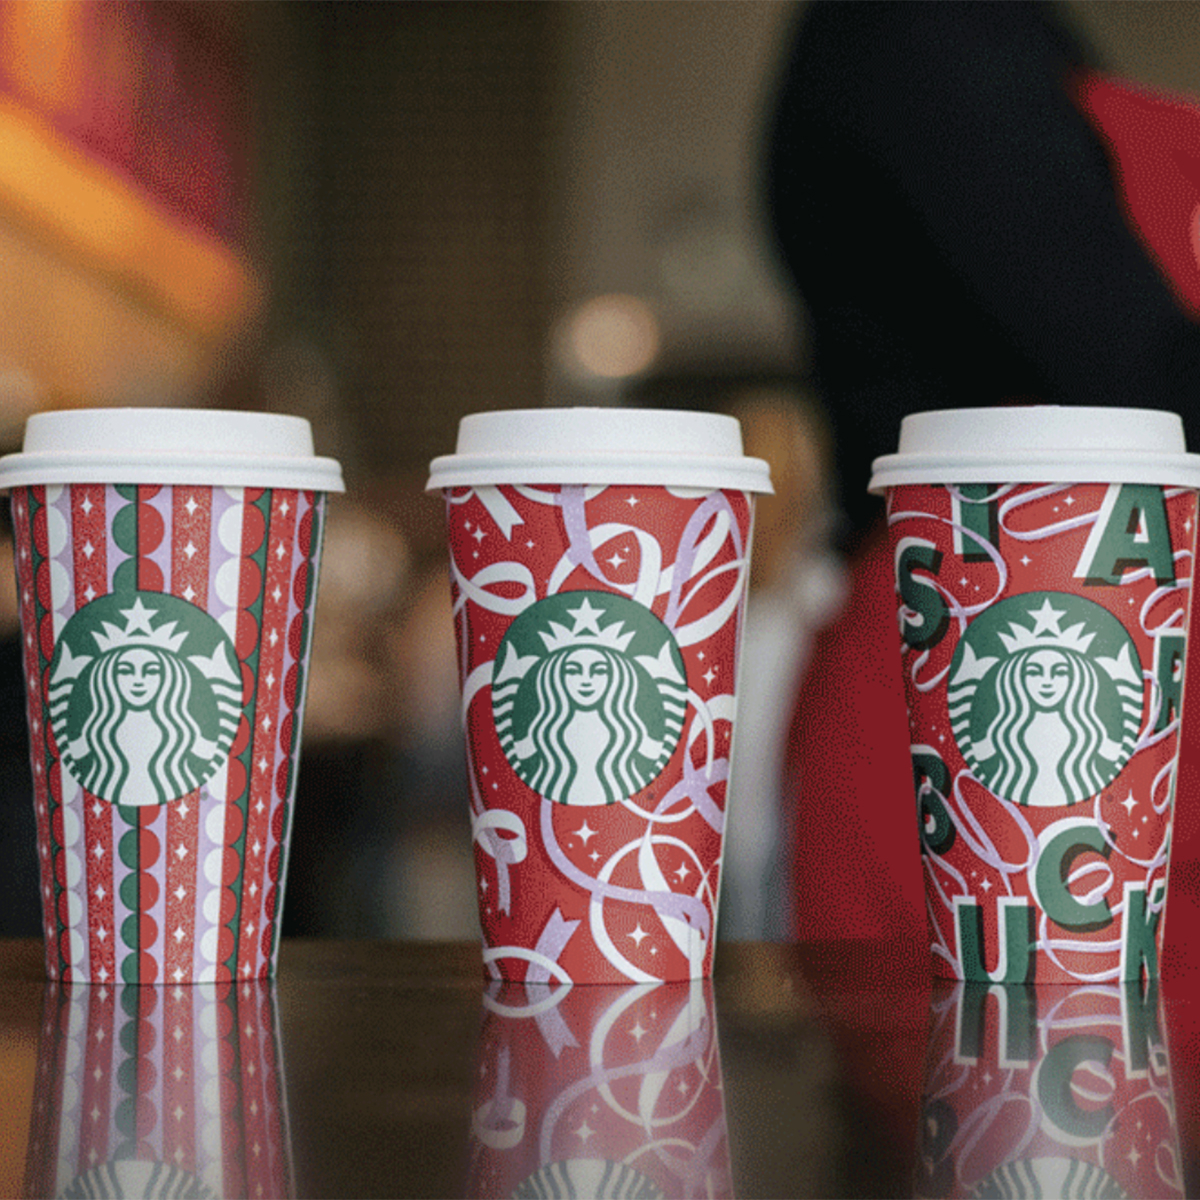 https://akns-images.eonline.com/eol_images/Entire_Site/2021103/rs_1200x1200-211103091444-1200-Starbucks-Holiday-Cups.jpg?fit=around%7C1080:540&output-quality=90&crop=1080:540;center,top